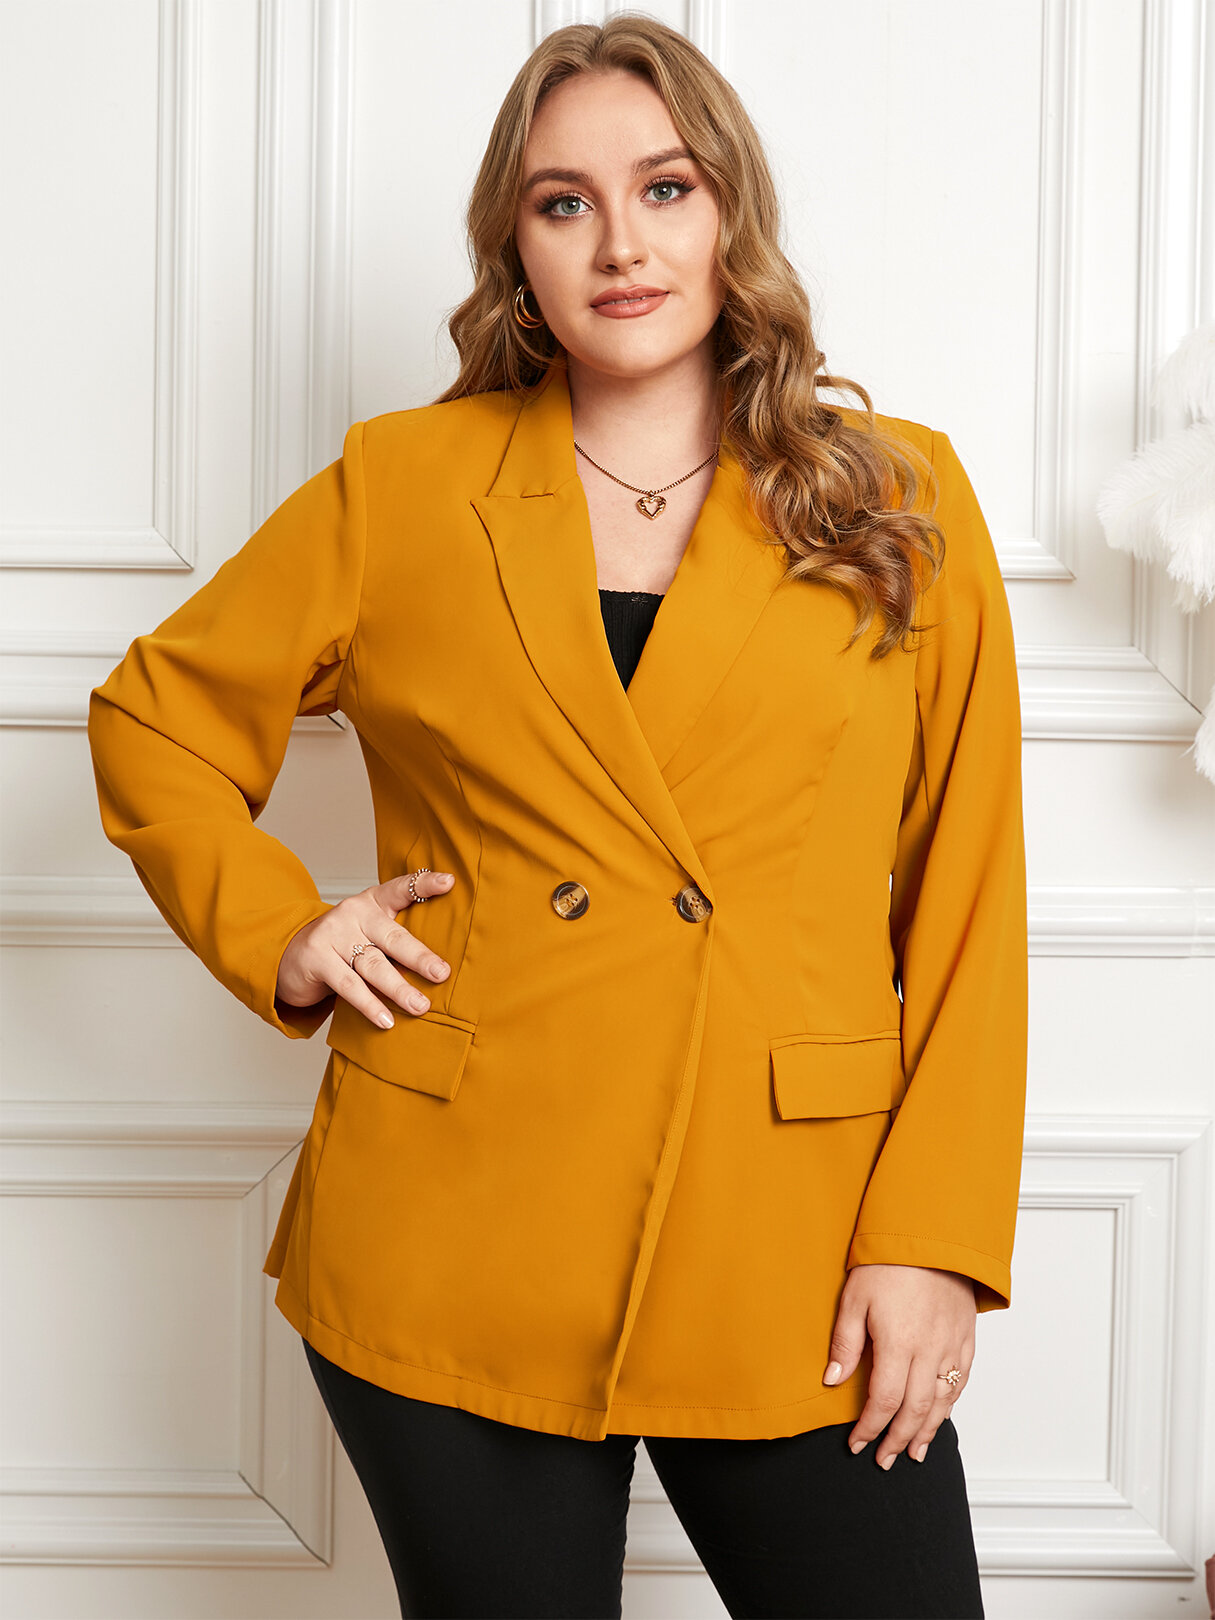 Plus Size Lapel Collar Front Button Pocket Long Sleeves Blazer от Newchic WW